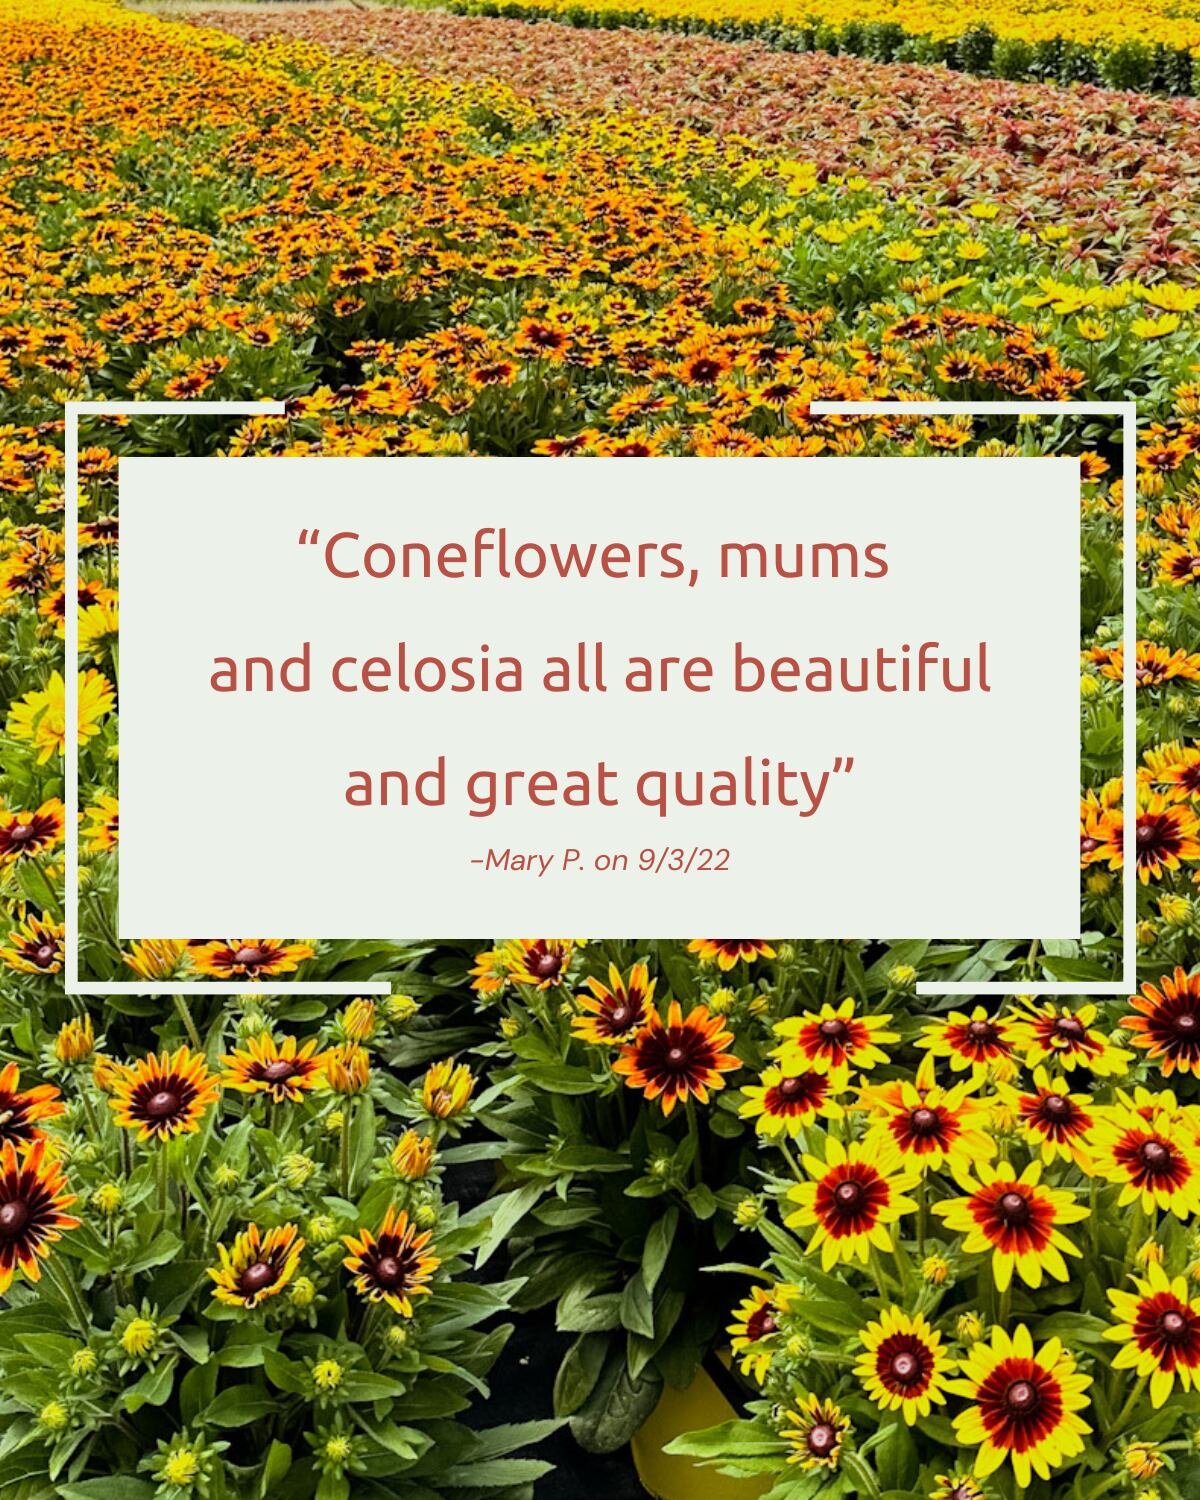 You heard it here first! 👏 👏 👏

Come see us this week to shop colorful mums, specialty items like celosia, asters, strawflowers, and zinnias, and some of our early pumpkin crop!